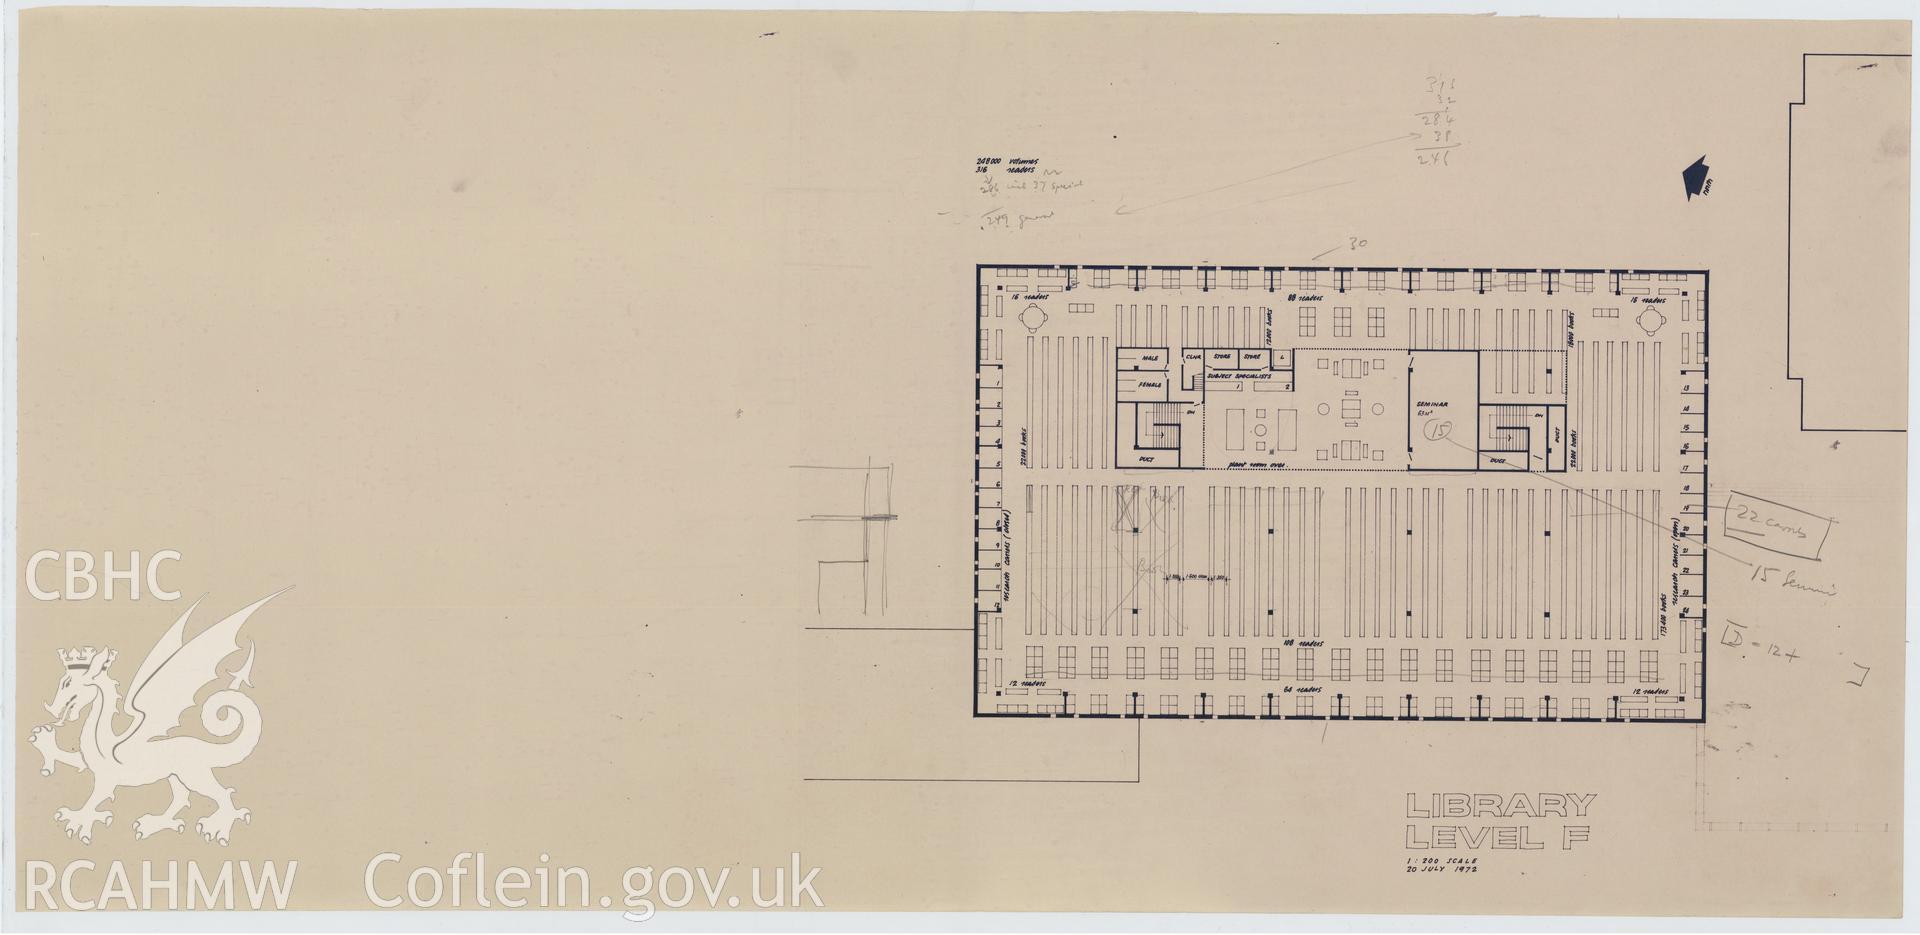 Digital copy of a plan showing Library Level F of the proposed Library Arts Complex at University College Aberystwyth, produced by Percy Thomas Partnership. Scale 1:200.